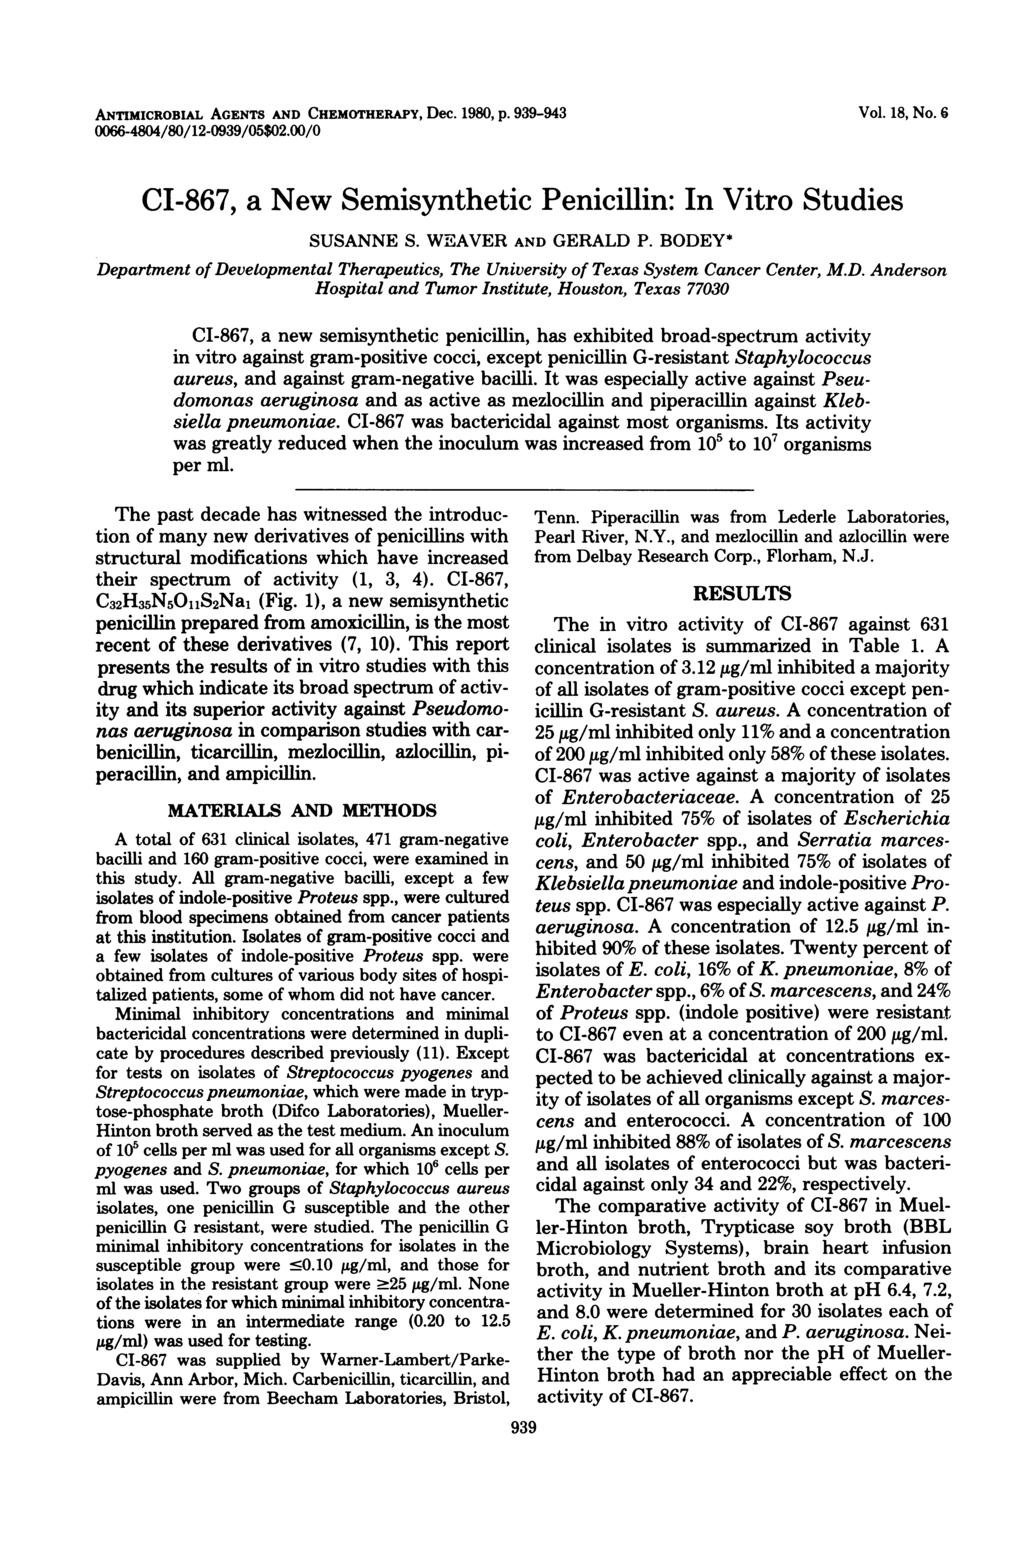 ANTIROBIAL AGENTS AND CHEMOTHERAPY, Dec. 19, p. 939-943 66-44//12-939/5$2./ Vol. 18, No. 6, a New Semisynthetic Penicillin: In Vitro Studies SUSANNE S. WEAVER AND GERALD P.